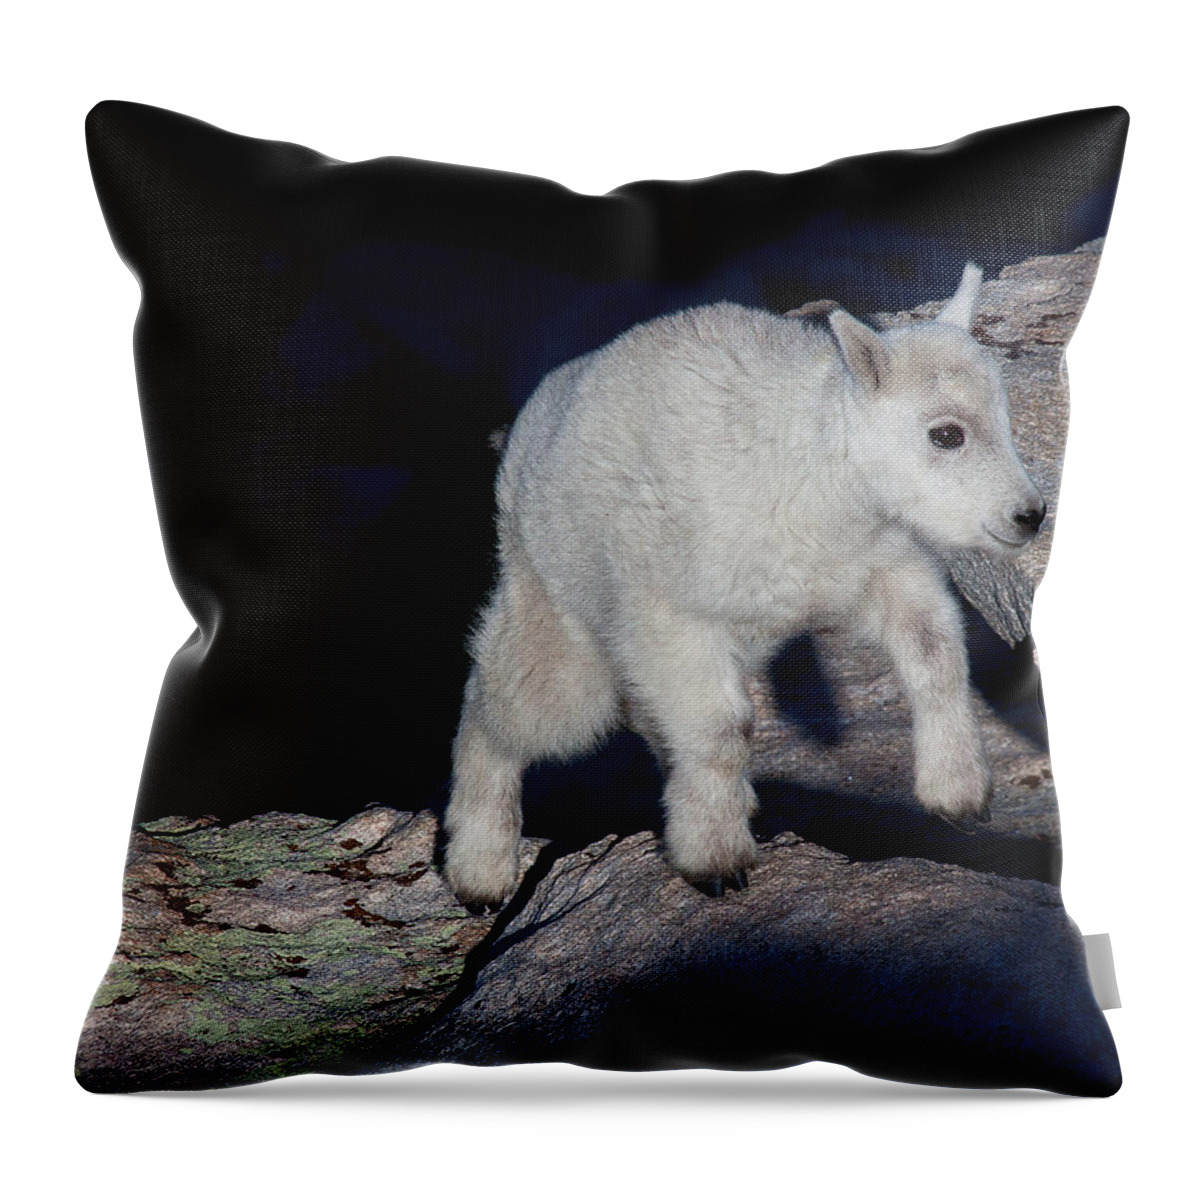 Mountain Goats; Posing; Group Photo; Baby Goat; Nature; Colorado; Crowd; Baby Goat; Mountain Goat Baby; Happy; Joy; Nature; Brothers Throw Pillow featuring the photograph Climb Every Mountain by Jim Garrison